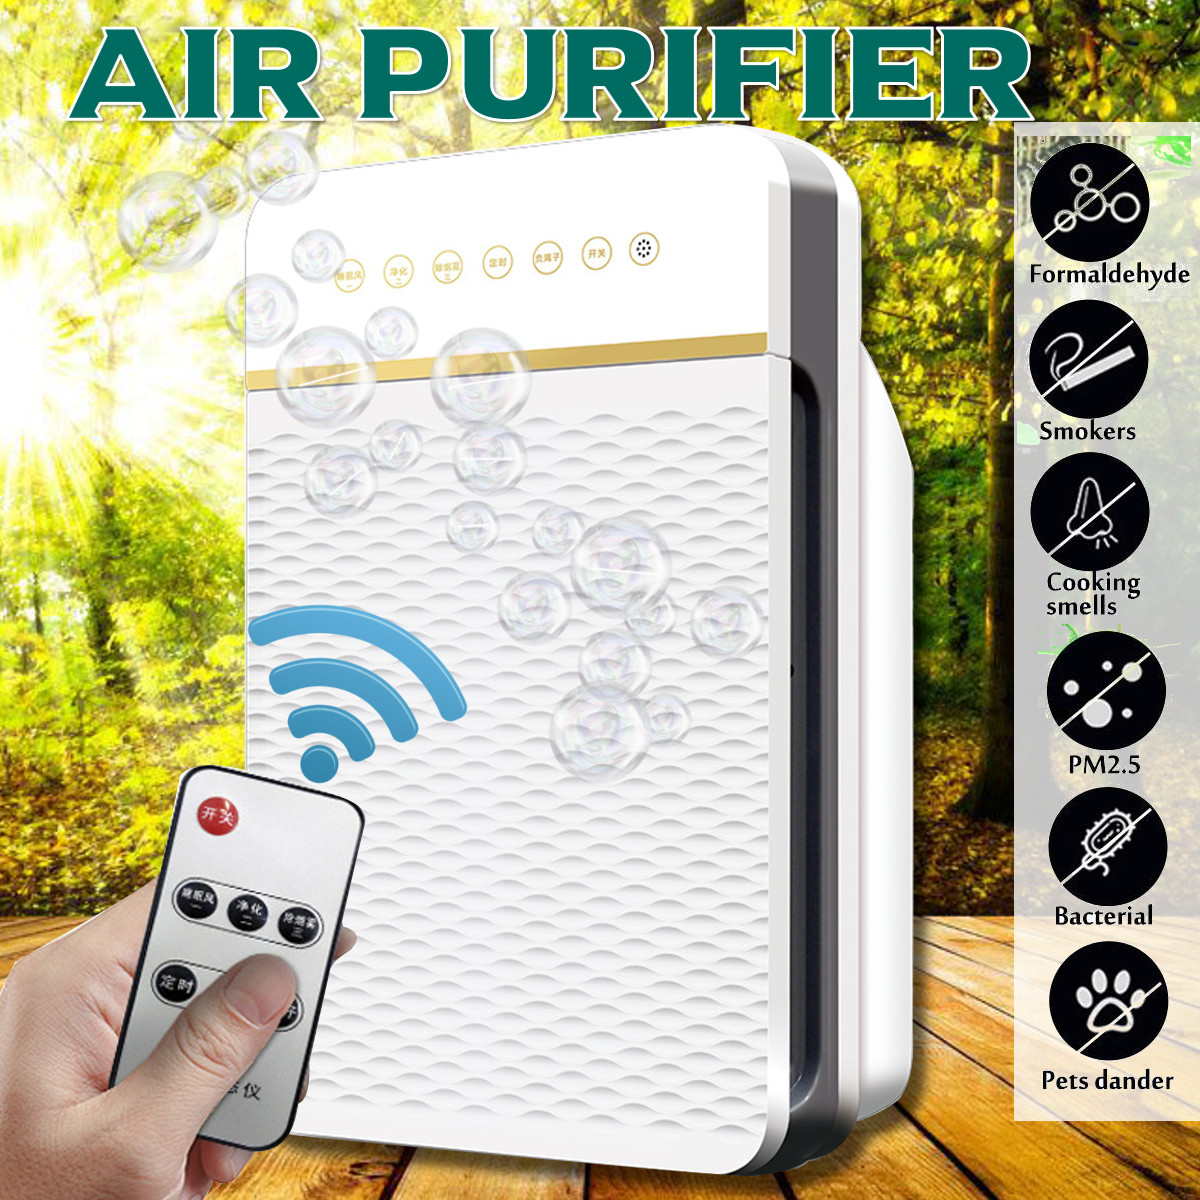 Air-Purifier-650msup3H-HEPA-Filter-Home-Germ-Smoke-Dust-Cleaner-w-Remote-Control-Air-Filter-Air-Clea-1631975-2